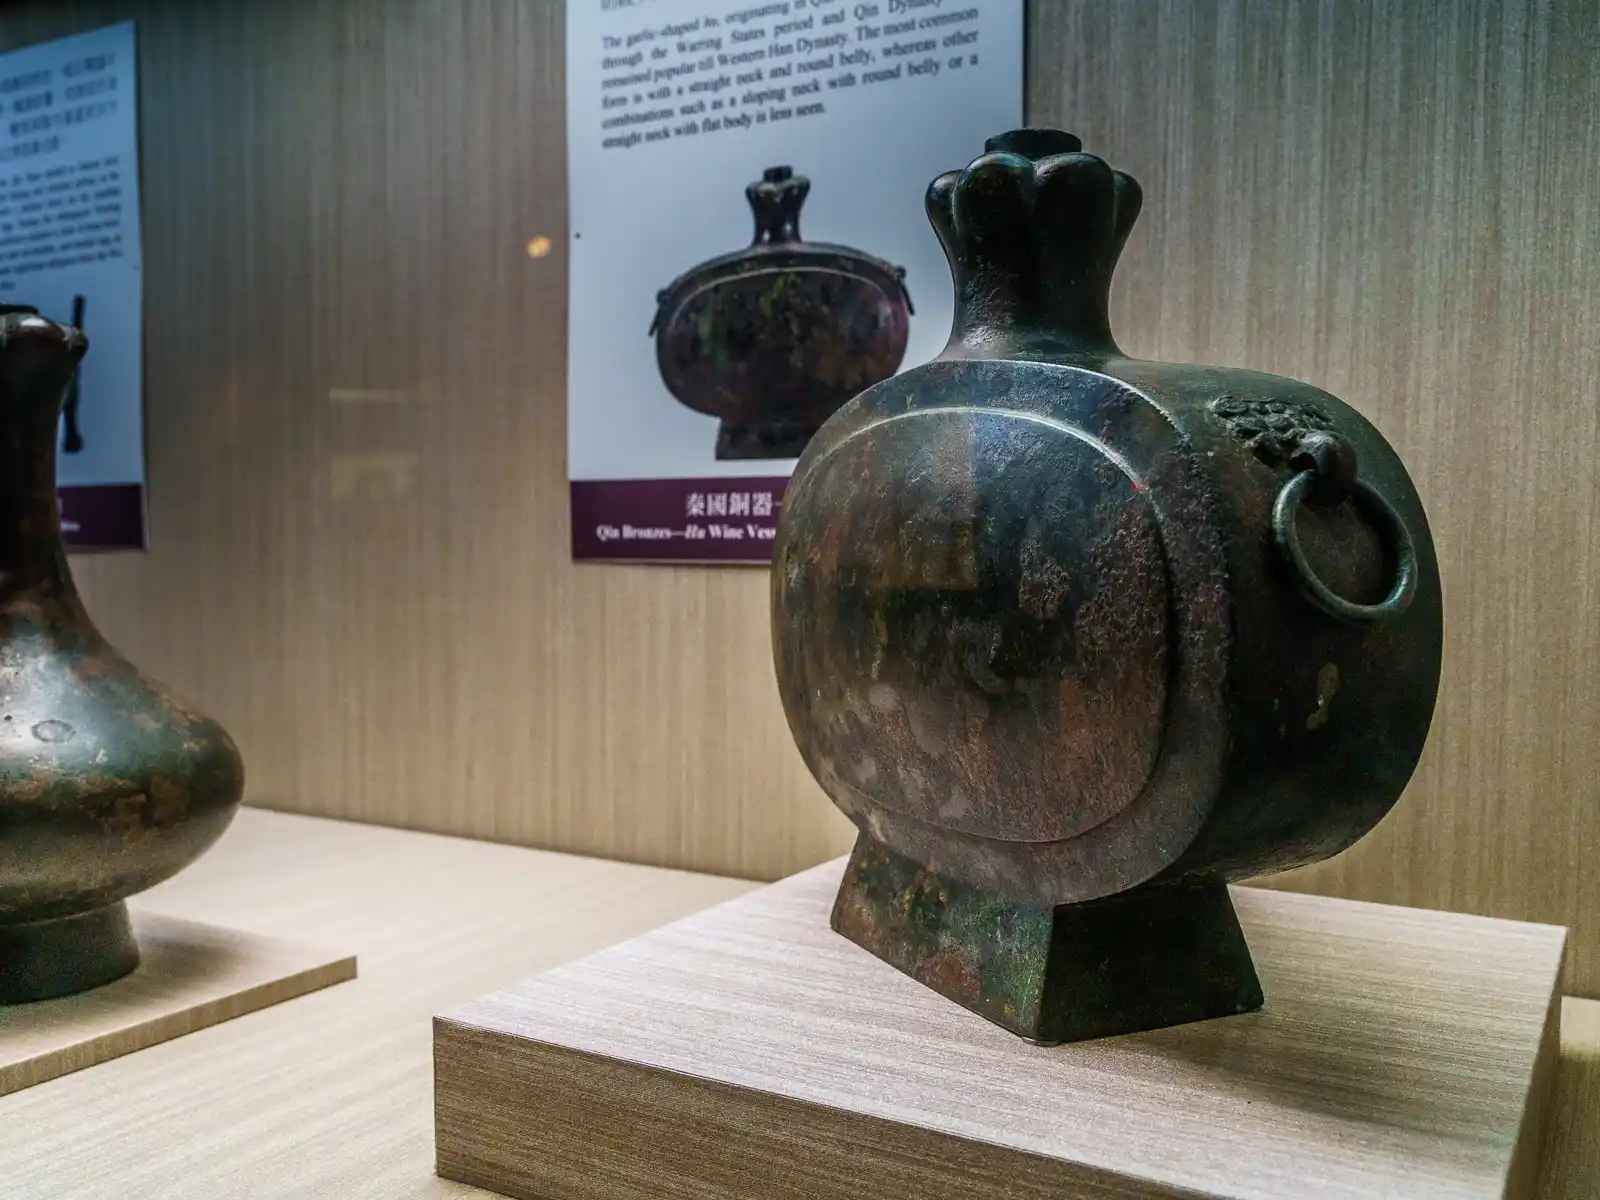 An intricately designed wine vessel with a circular body and handle on display.